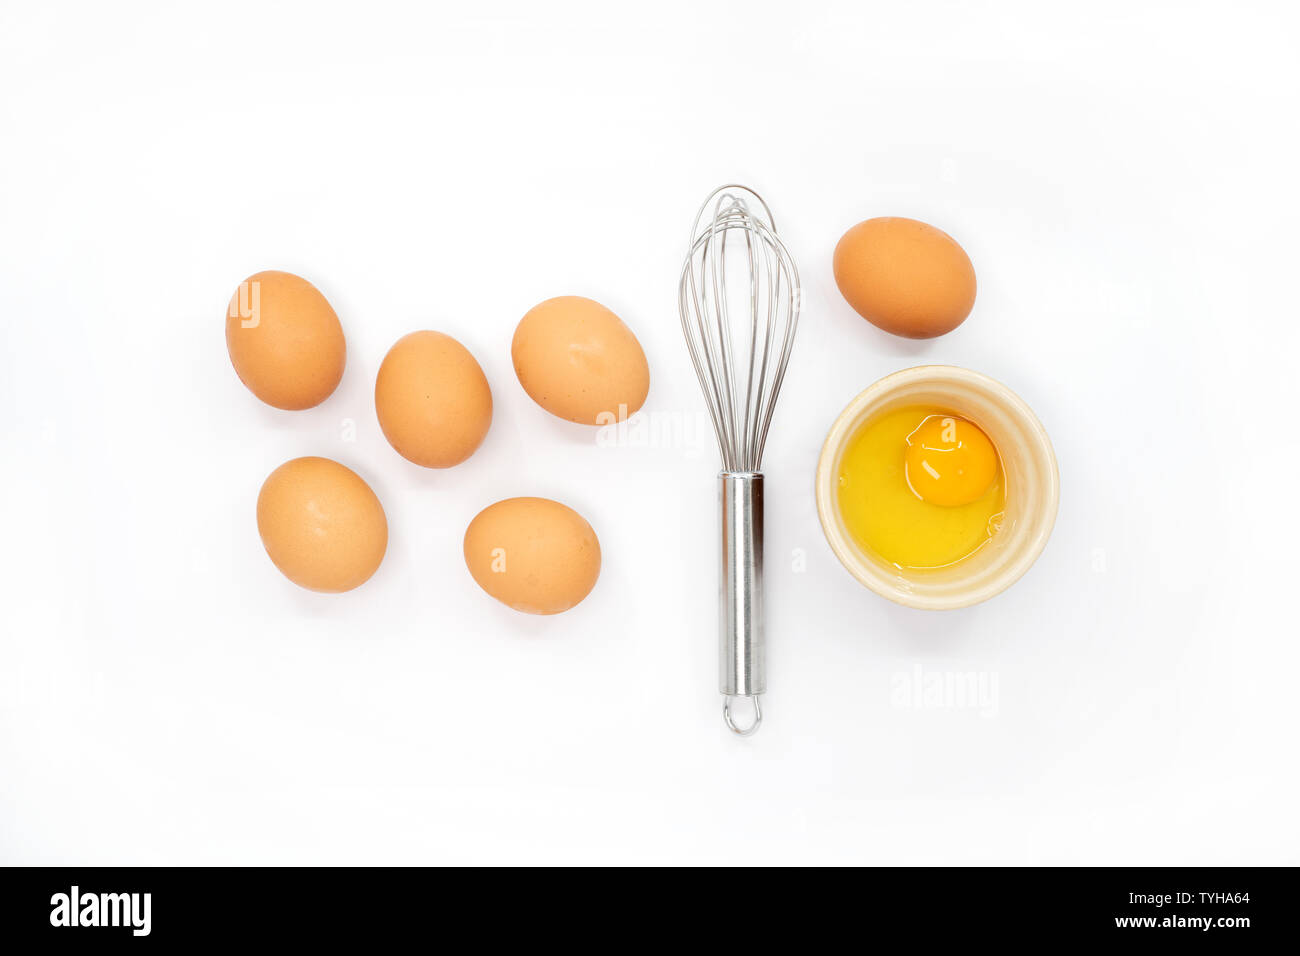 Eggs, a whisk and one egg yolk on a white background Stock Photo